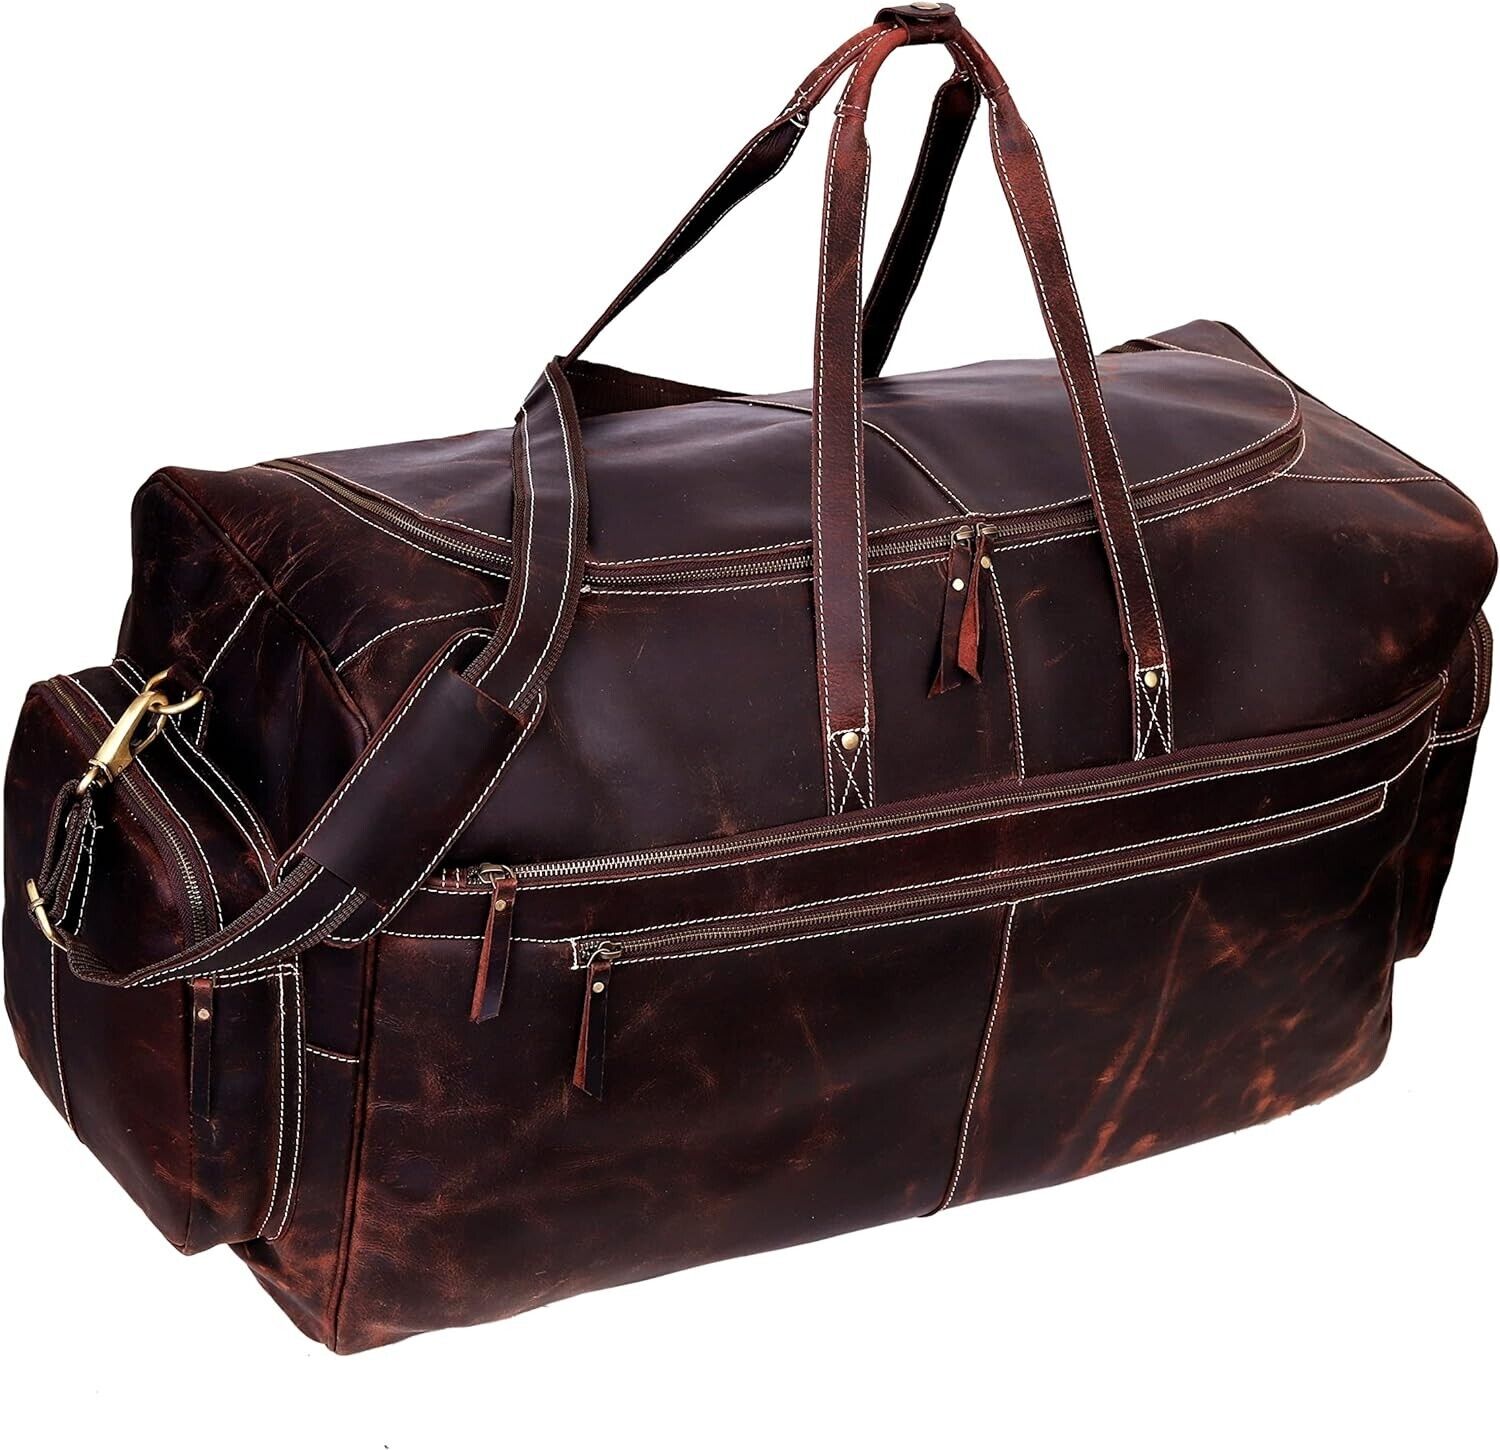 Large 28 inch duffel bags for men holdall leather travel bag overnight gym sport